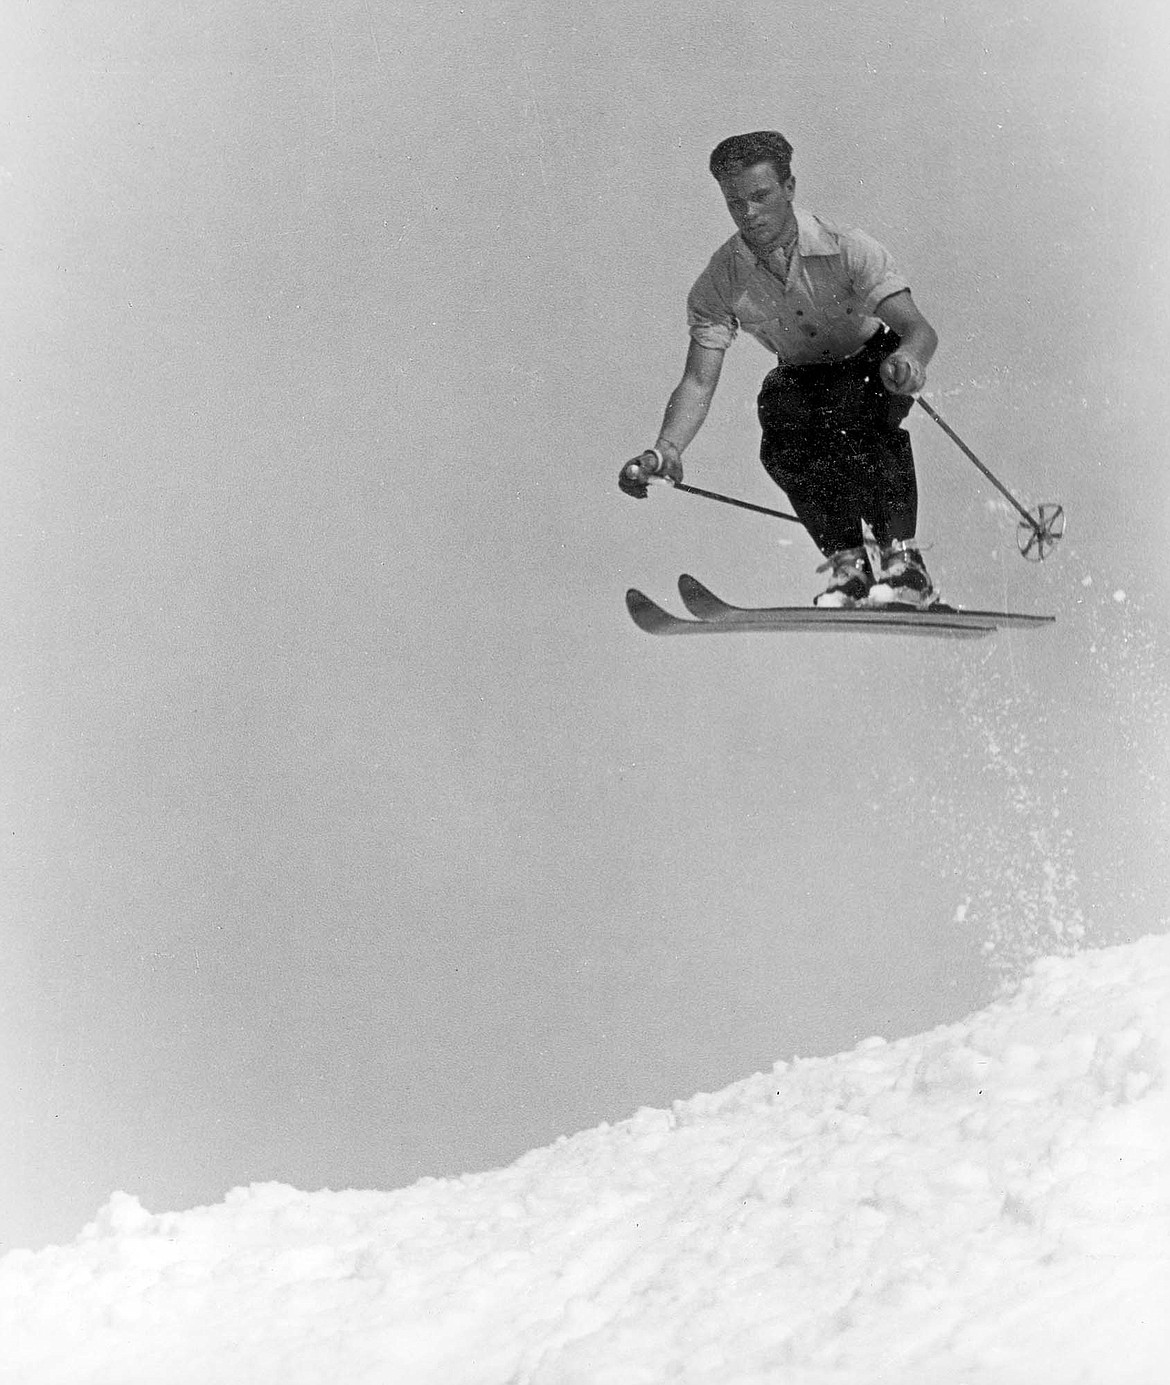 Toni Matt takes to the air. A former Austrian National Junior Champion, Matt was the ski school director at Big Mountain from 1949 to 1955. He was also instrumental in laying out
the downhill race course when Big Mountain hosted the 1949 and 1951 US National Championships. A prominent ski run at Whitefish Mountain Resort bears his name. (Courtesy photo)